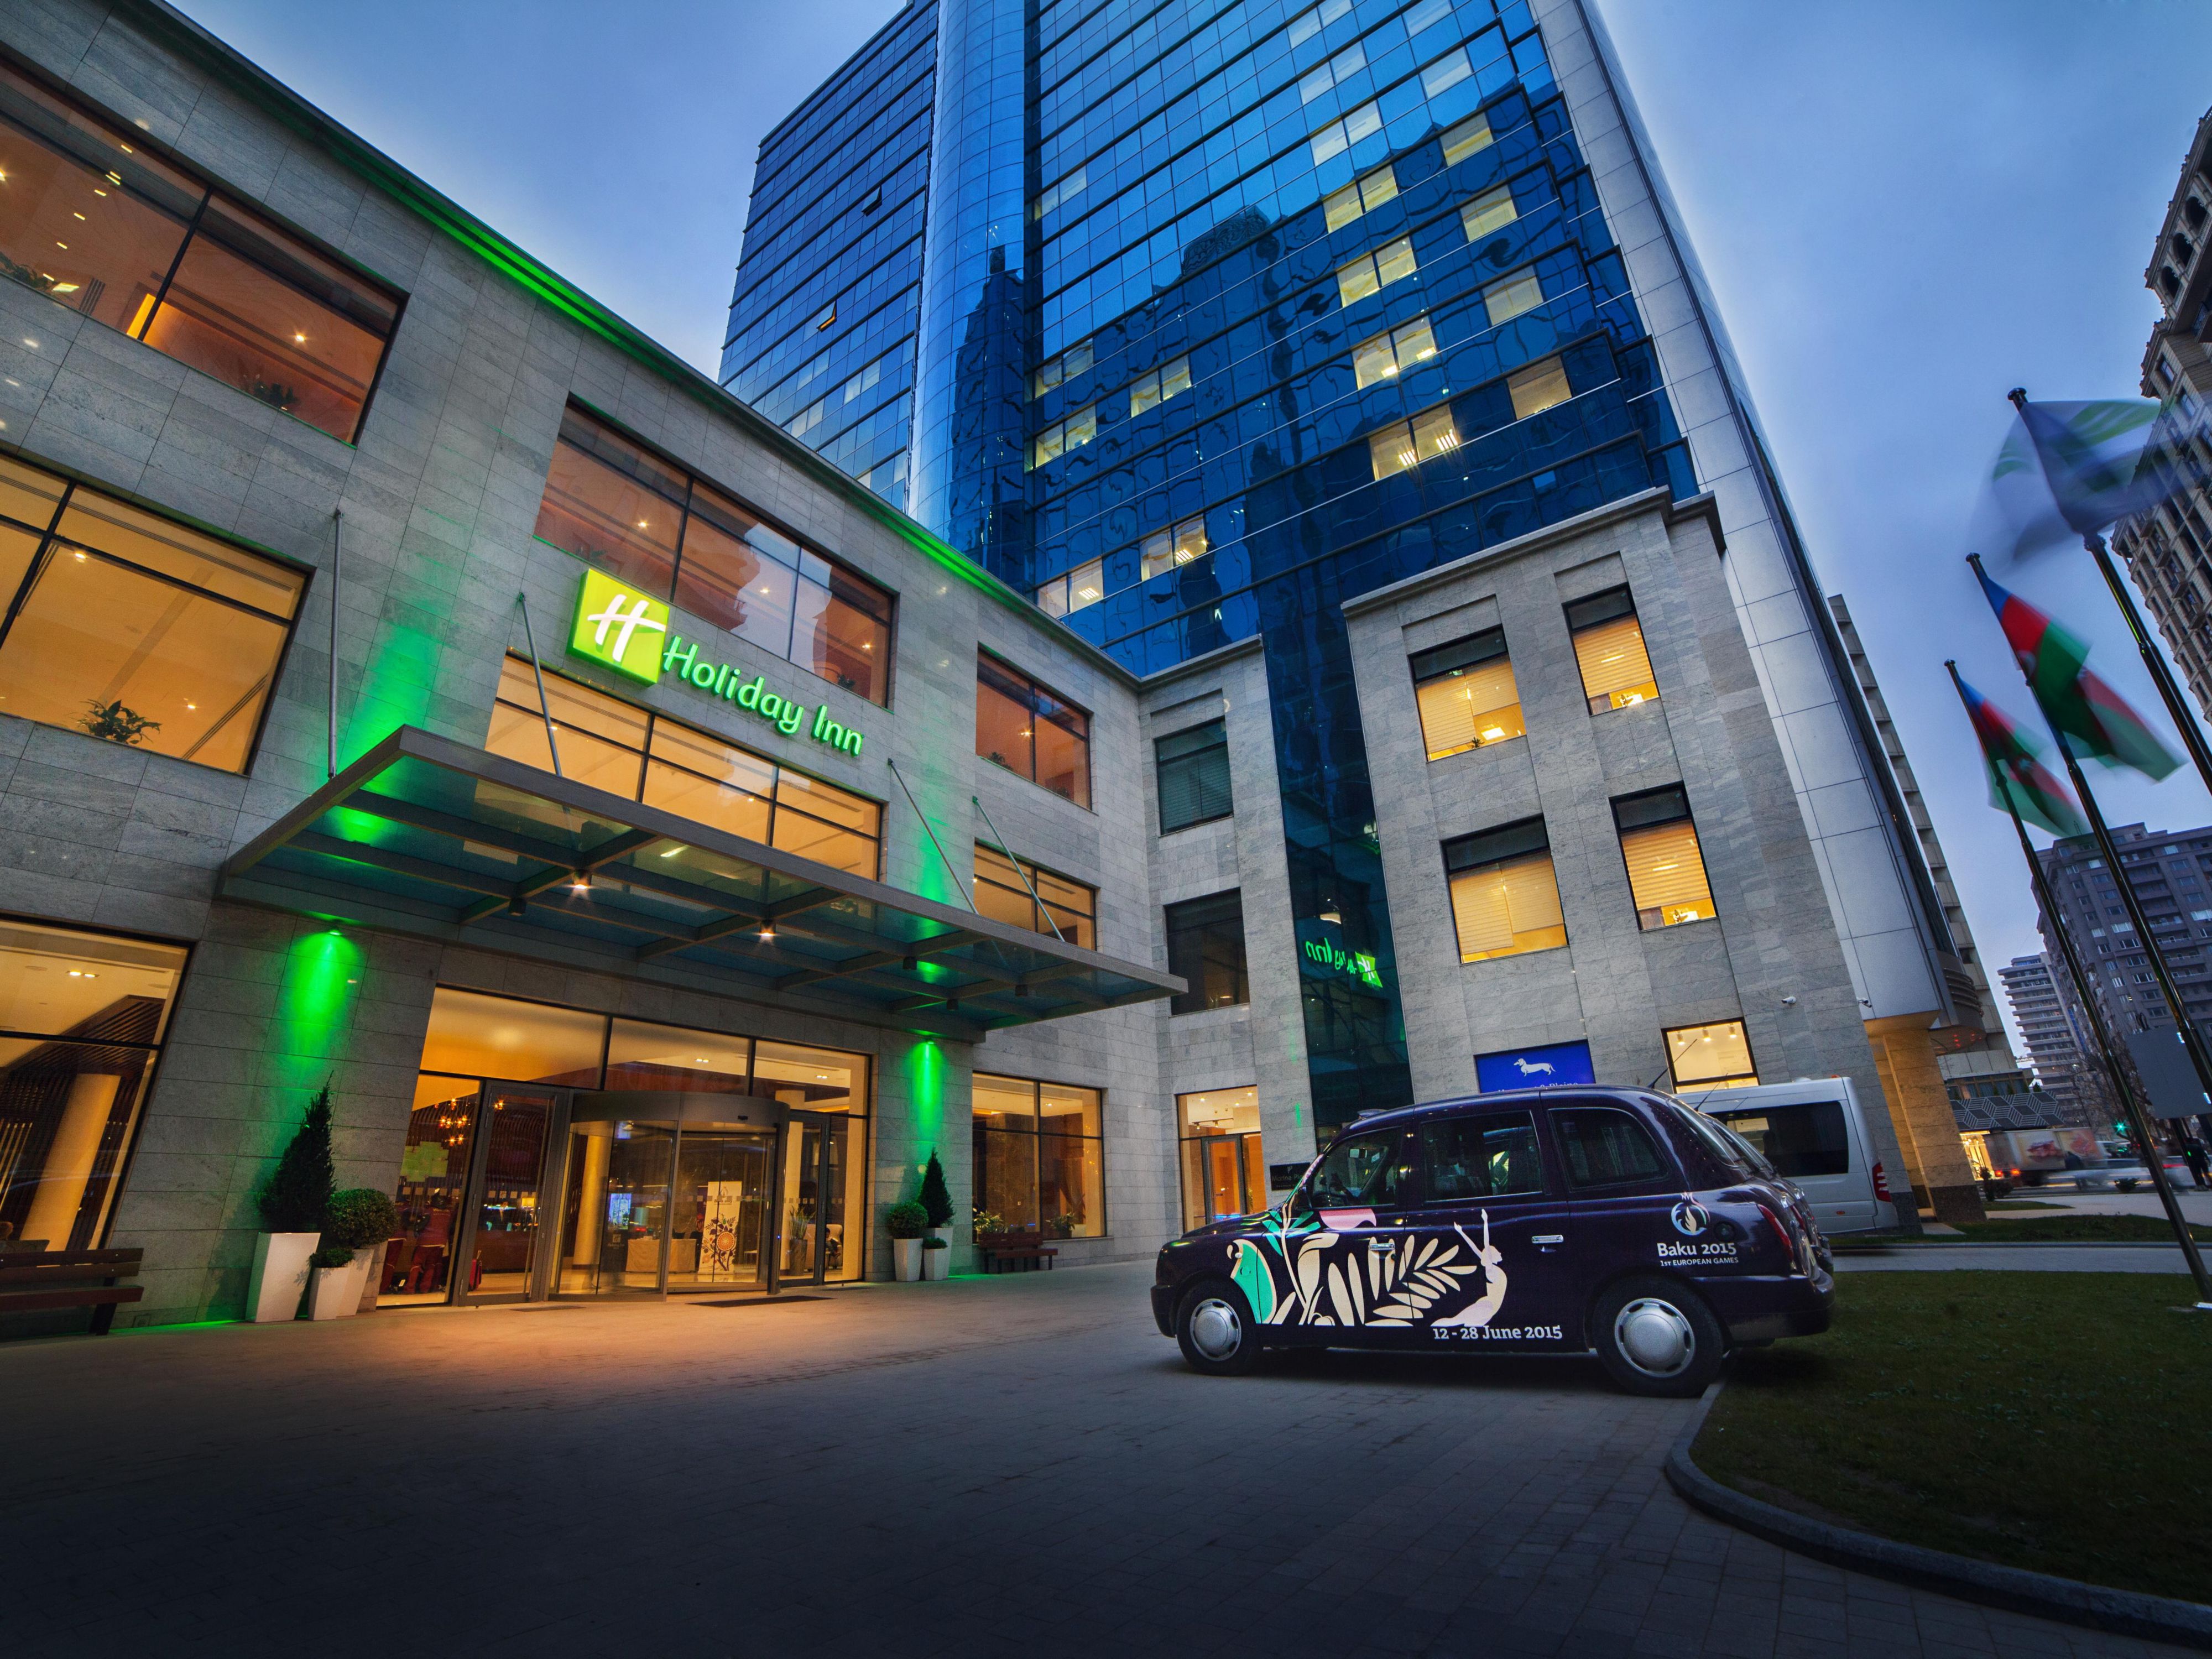 Holiday Inn Hotel located at the heart of Baku’s business and social district, Holiday Inn Baku is the ideal choice for business and leisure travelers.